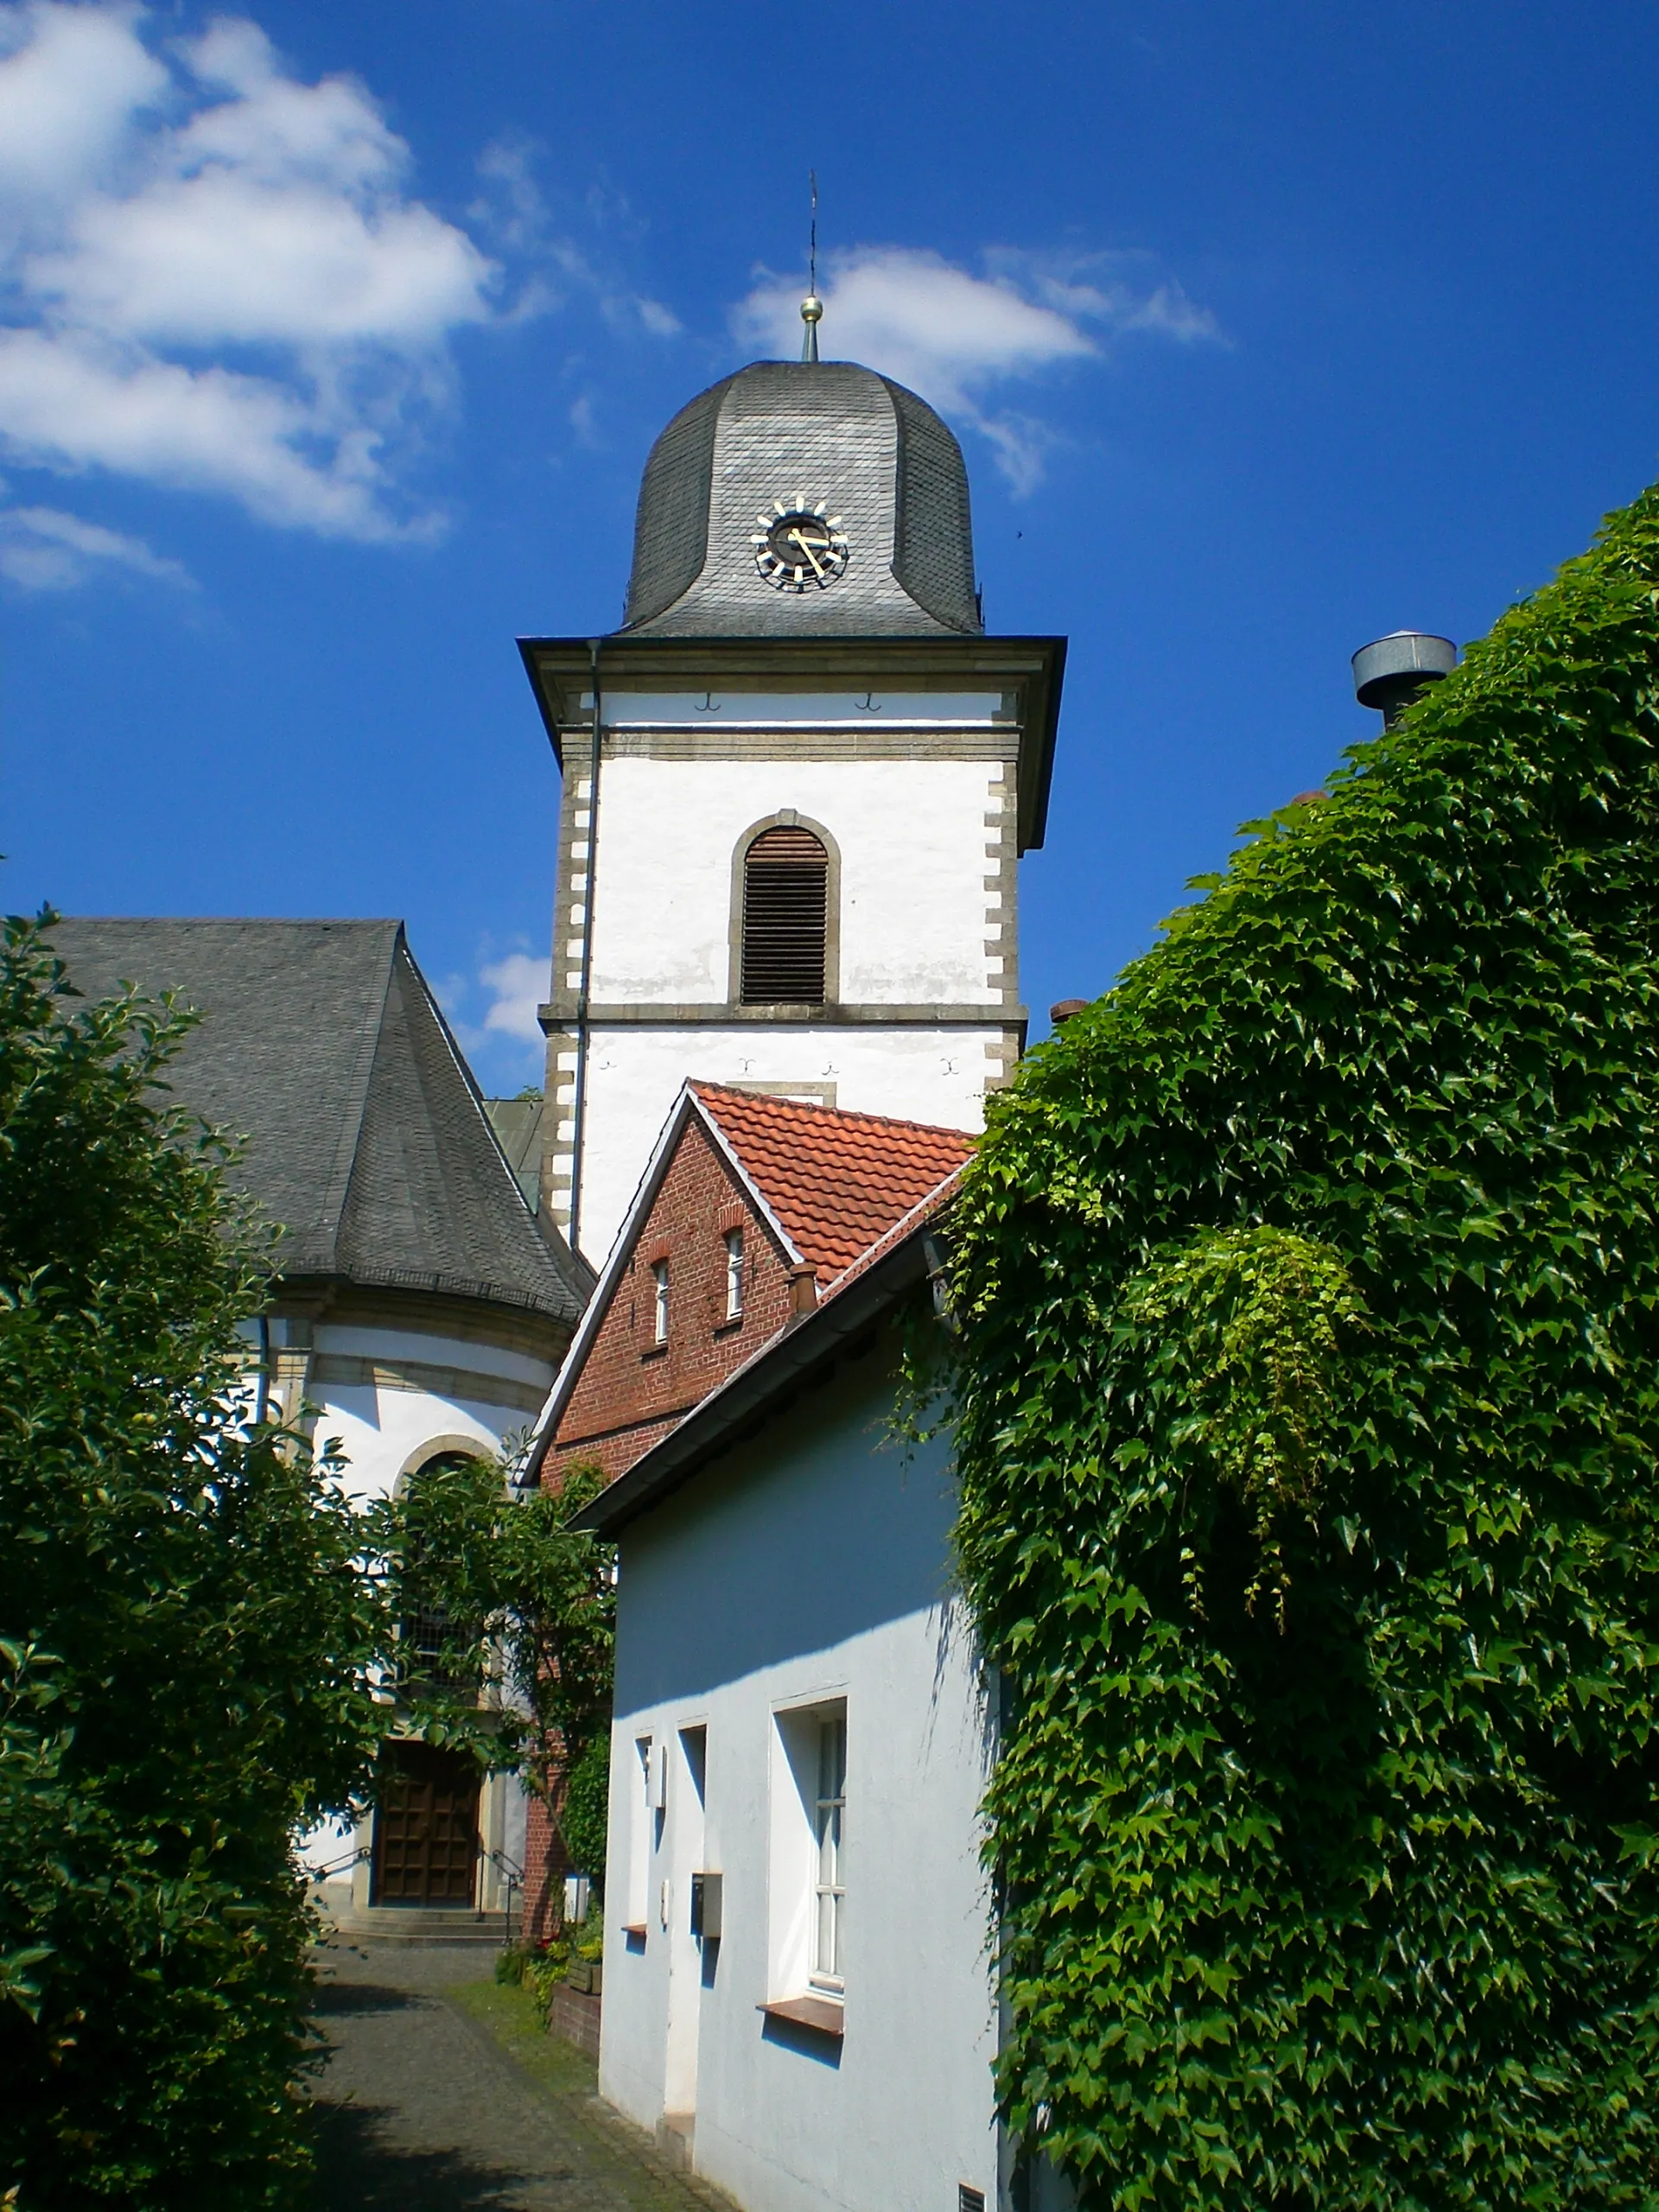 Photo showing: View to the tower of the St. Anna church of Verl, Germany.